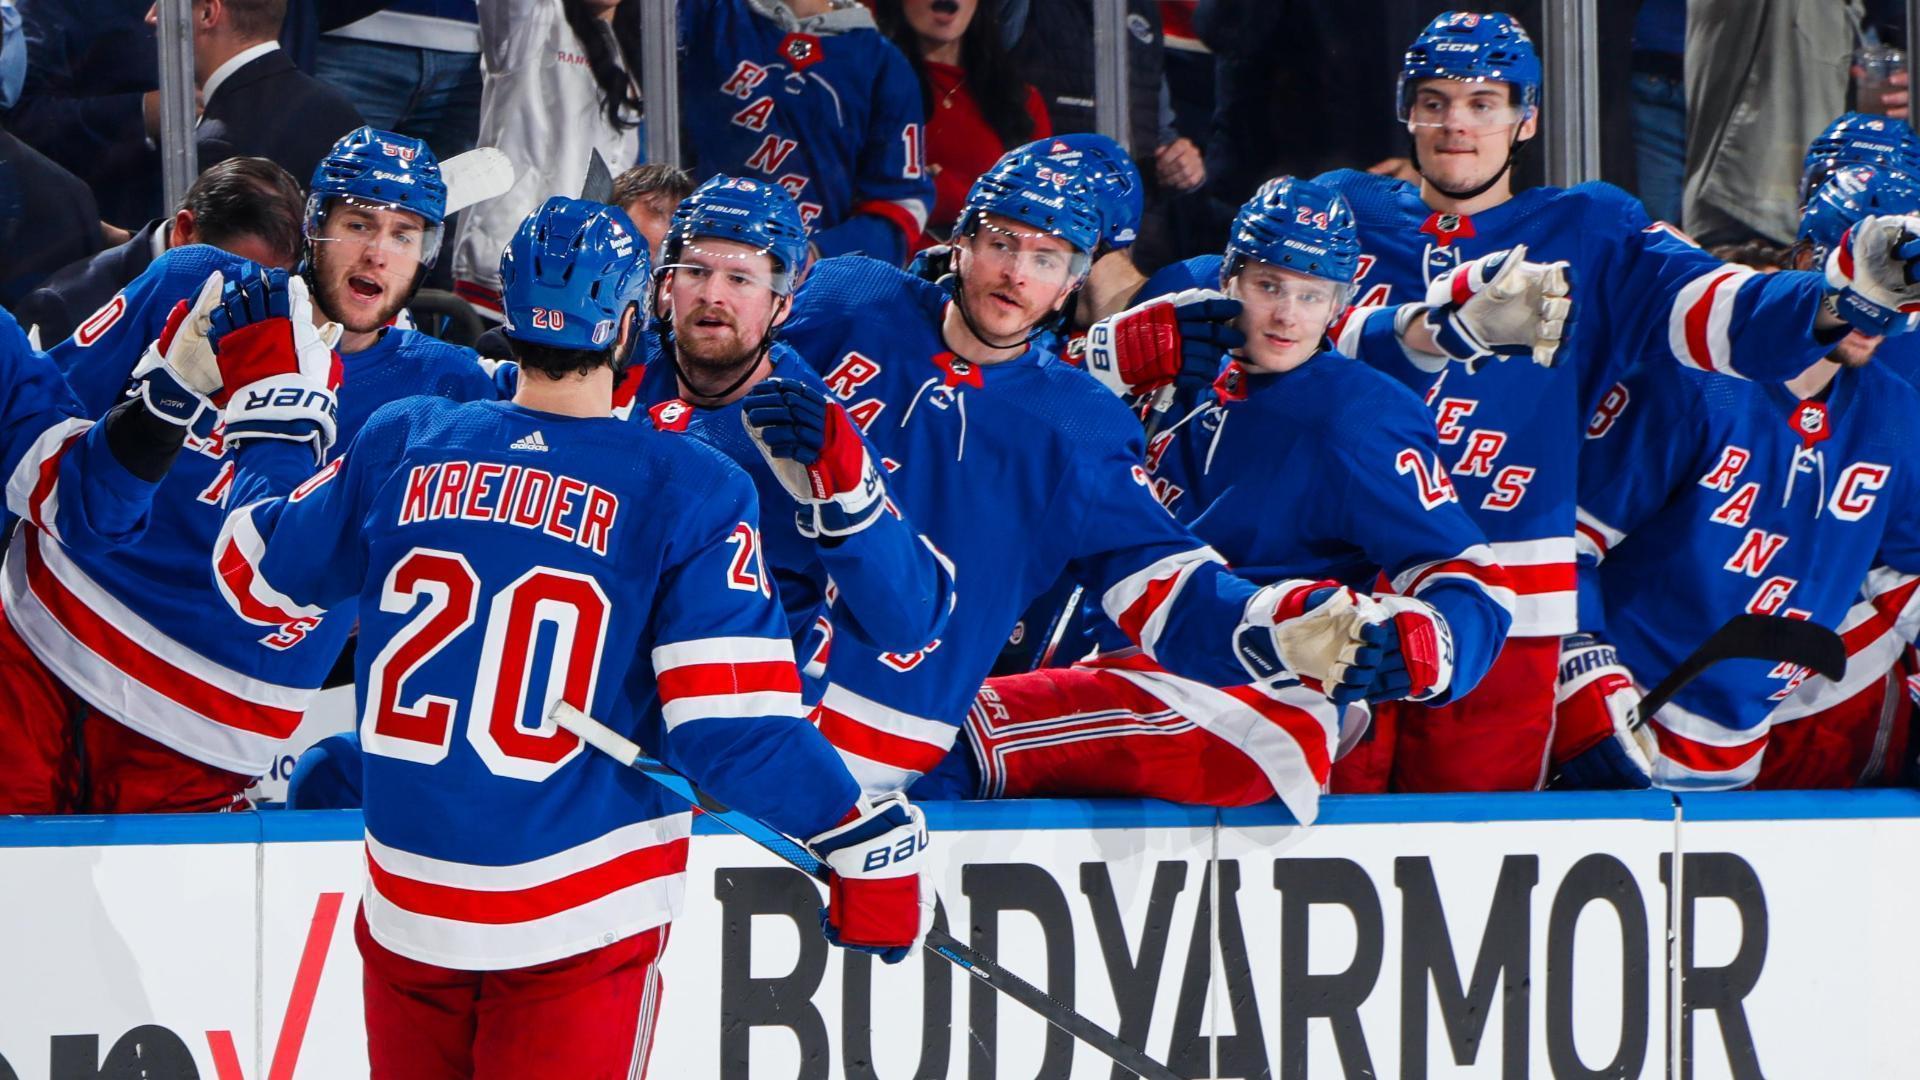 Chris Kreider charges up MSG crowd with game-tying goal